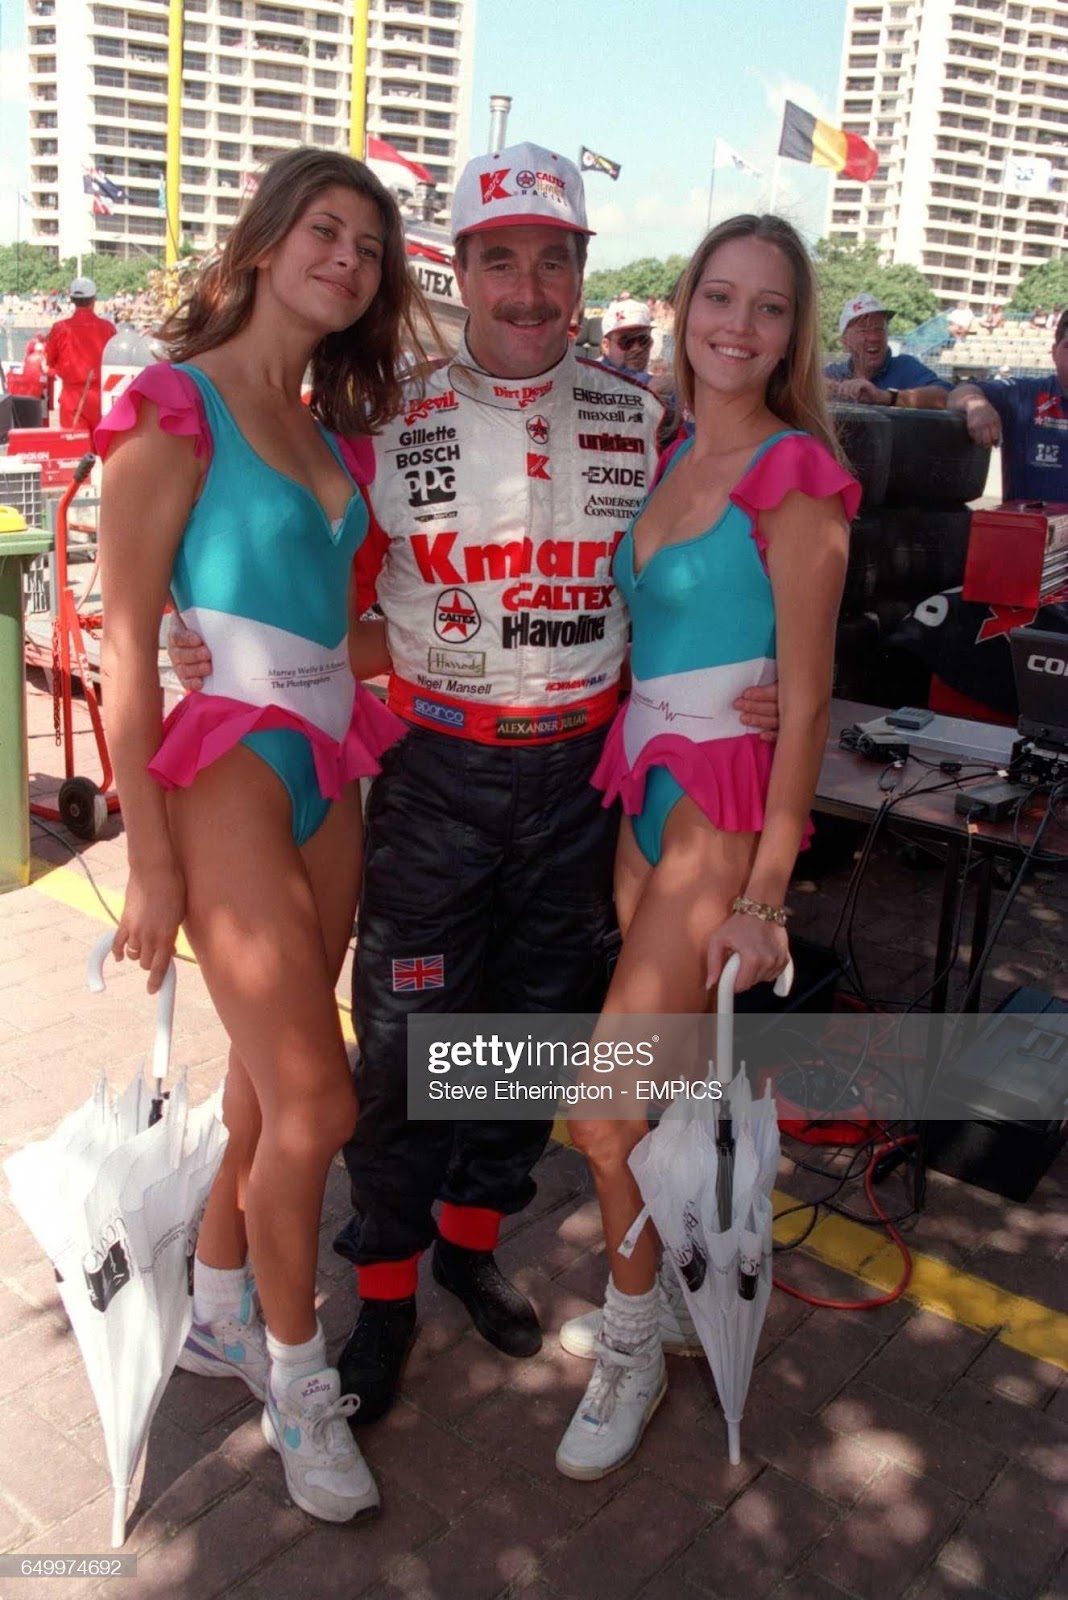 Nigel Mansell poses with promotion girls at Australian Indy car racing in 1994.